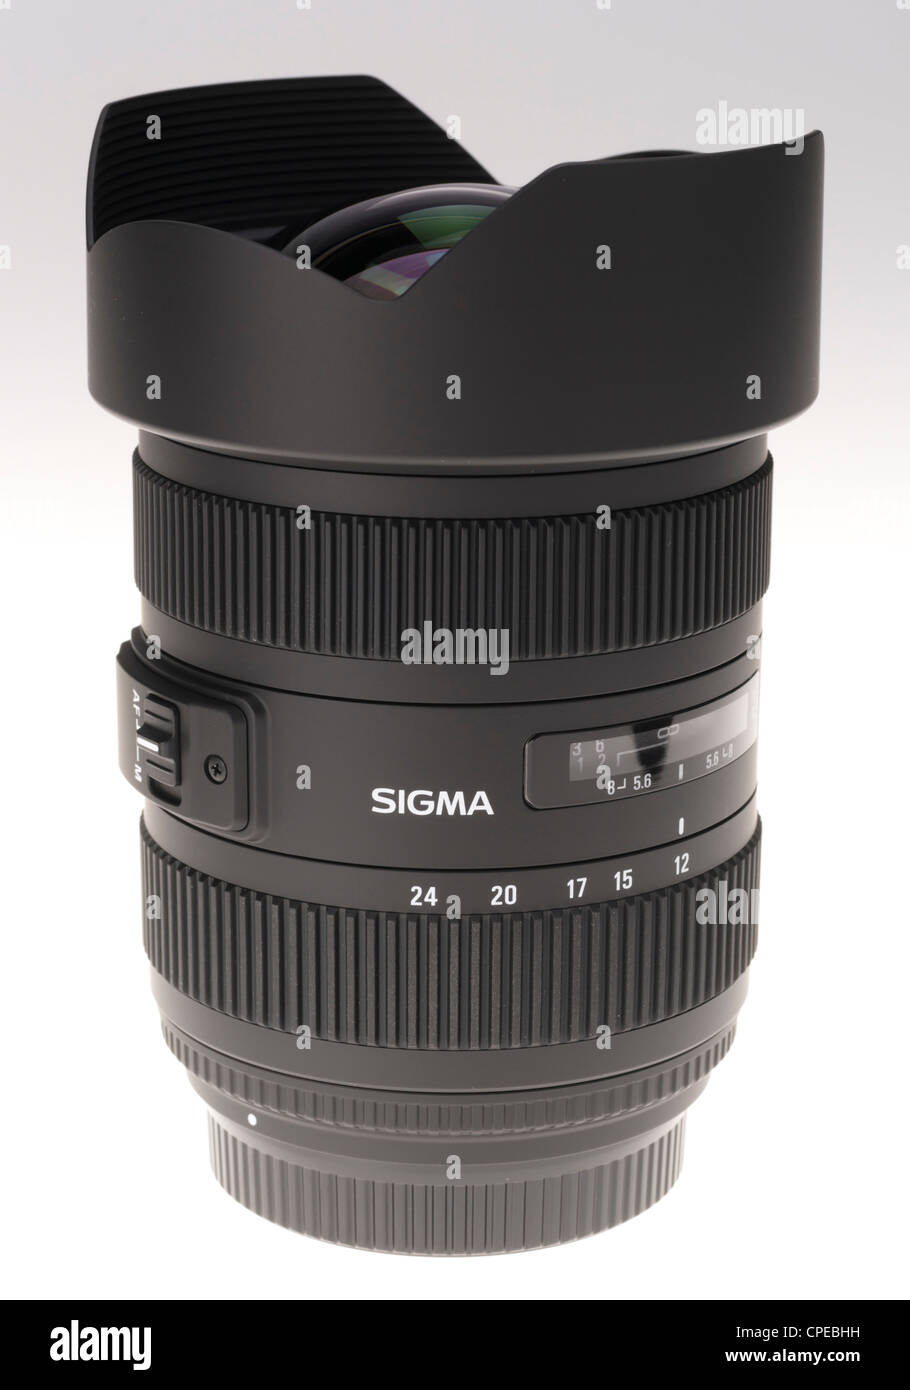 Sigma mark II (new 2011) 12-24mm ultra wide angle zoom for full frame 35mm format cameras. Stock Photo